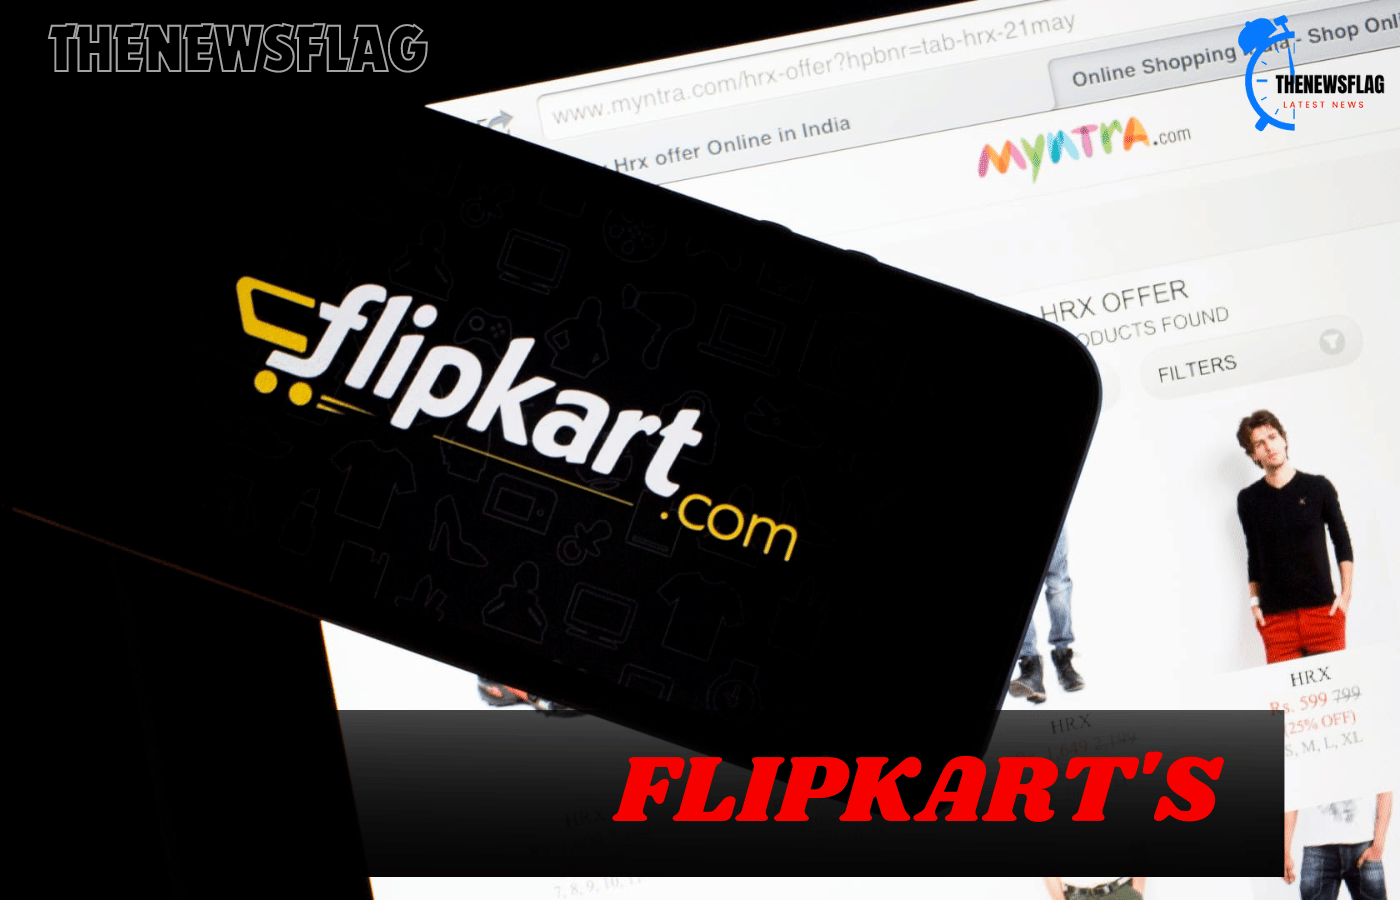 The causes behind Flipkart's worth decline of nearly ₹41,000 crore till 2022 are as follows: